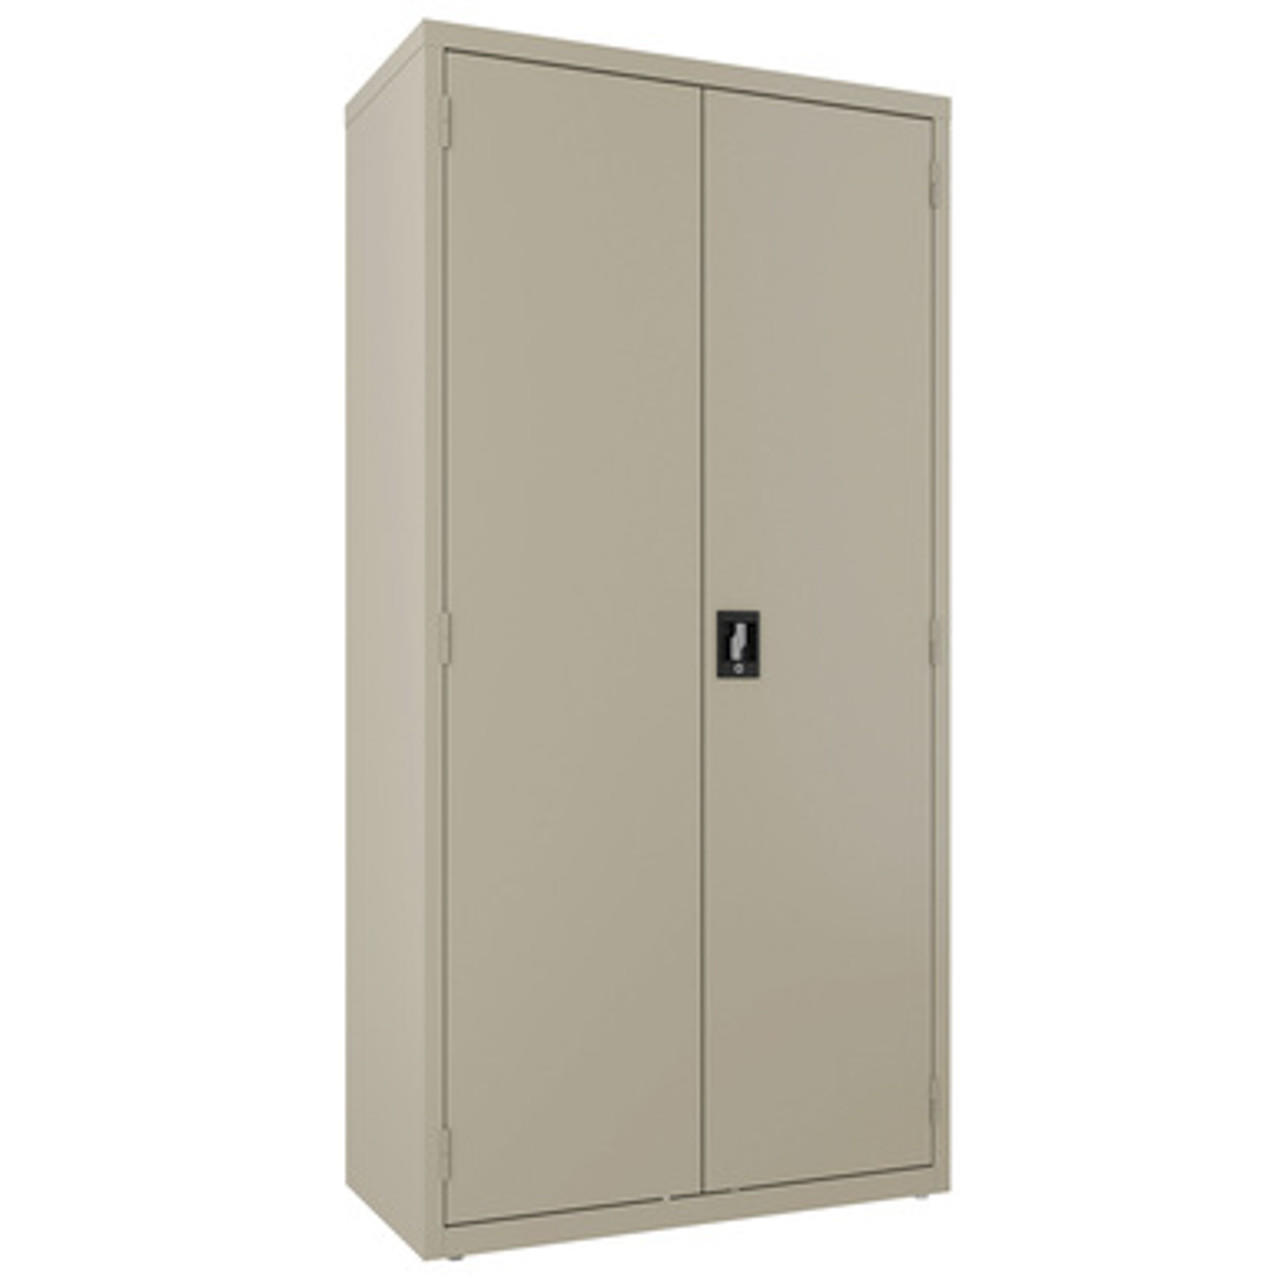  Office Source Large Steel Storage and Wardrobe Cabinet Combo OSWD3672 